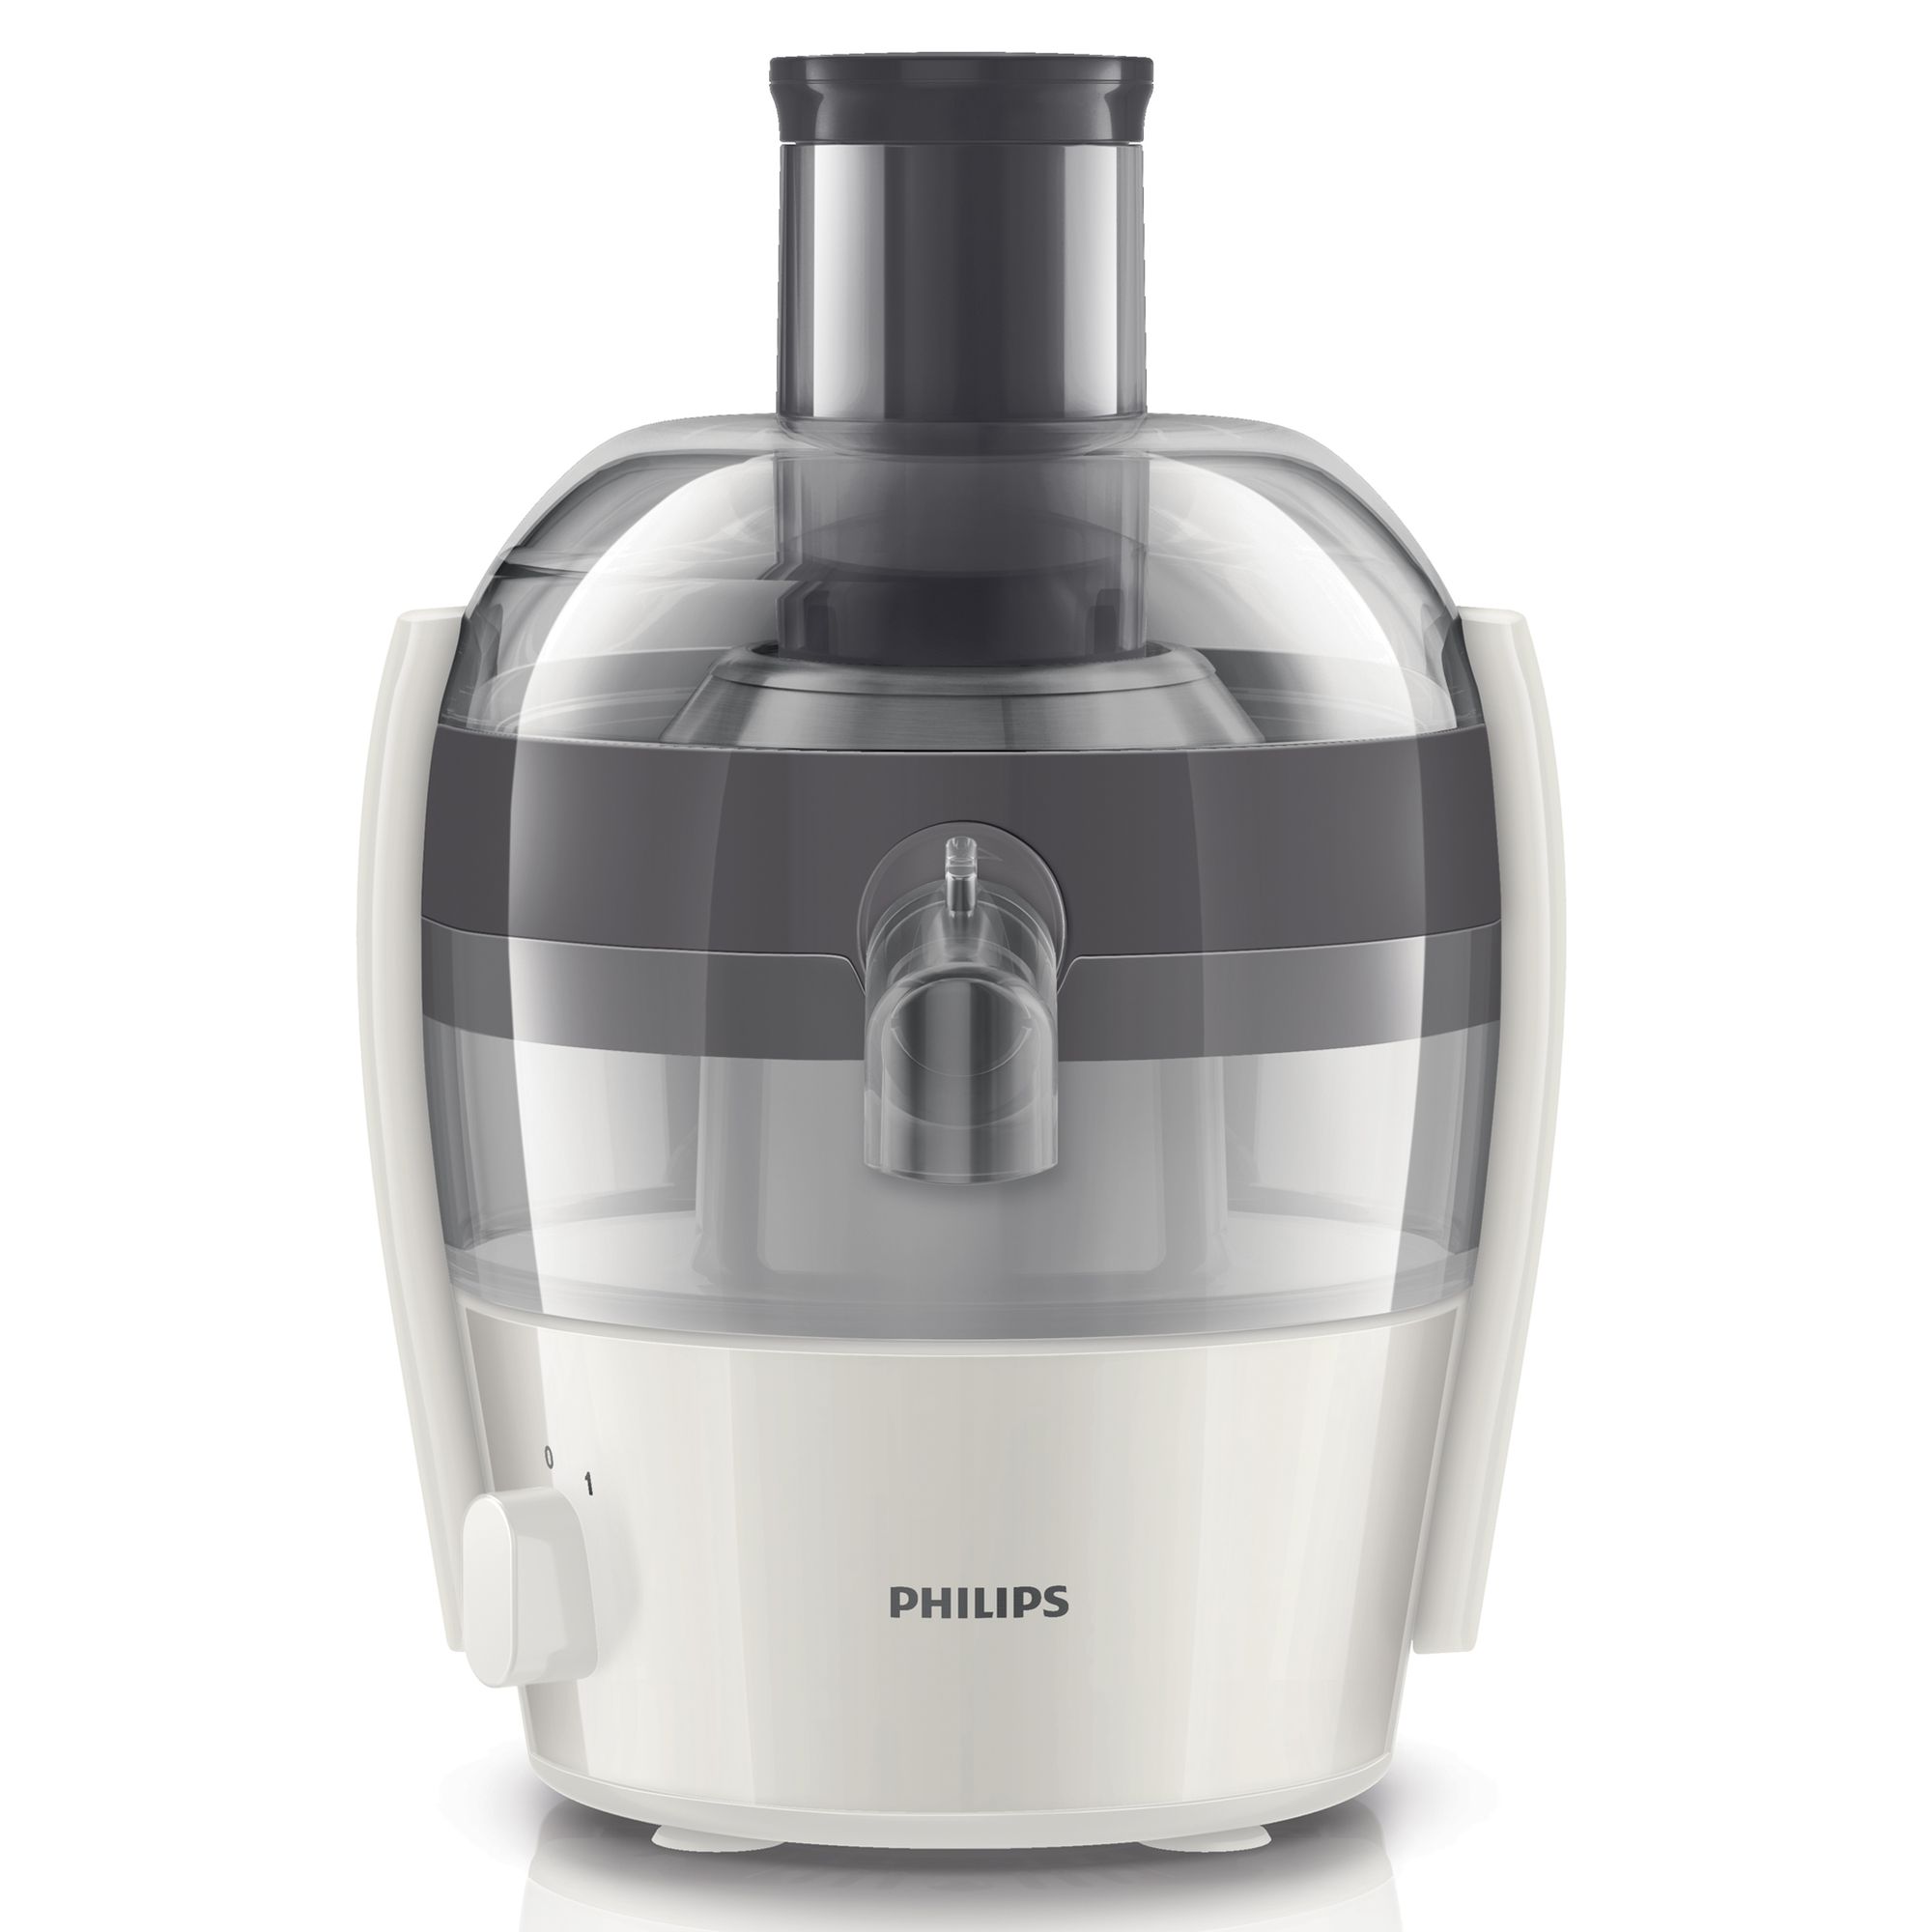 Philips HR1832/31 Compact Viva Collection Juicer, White